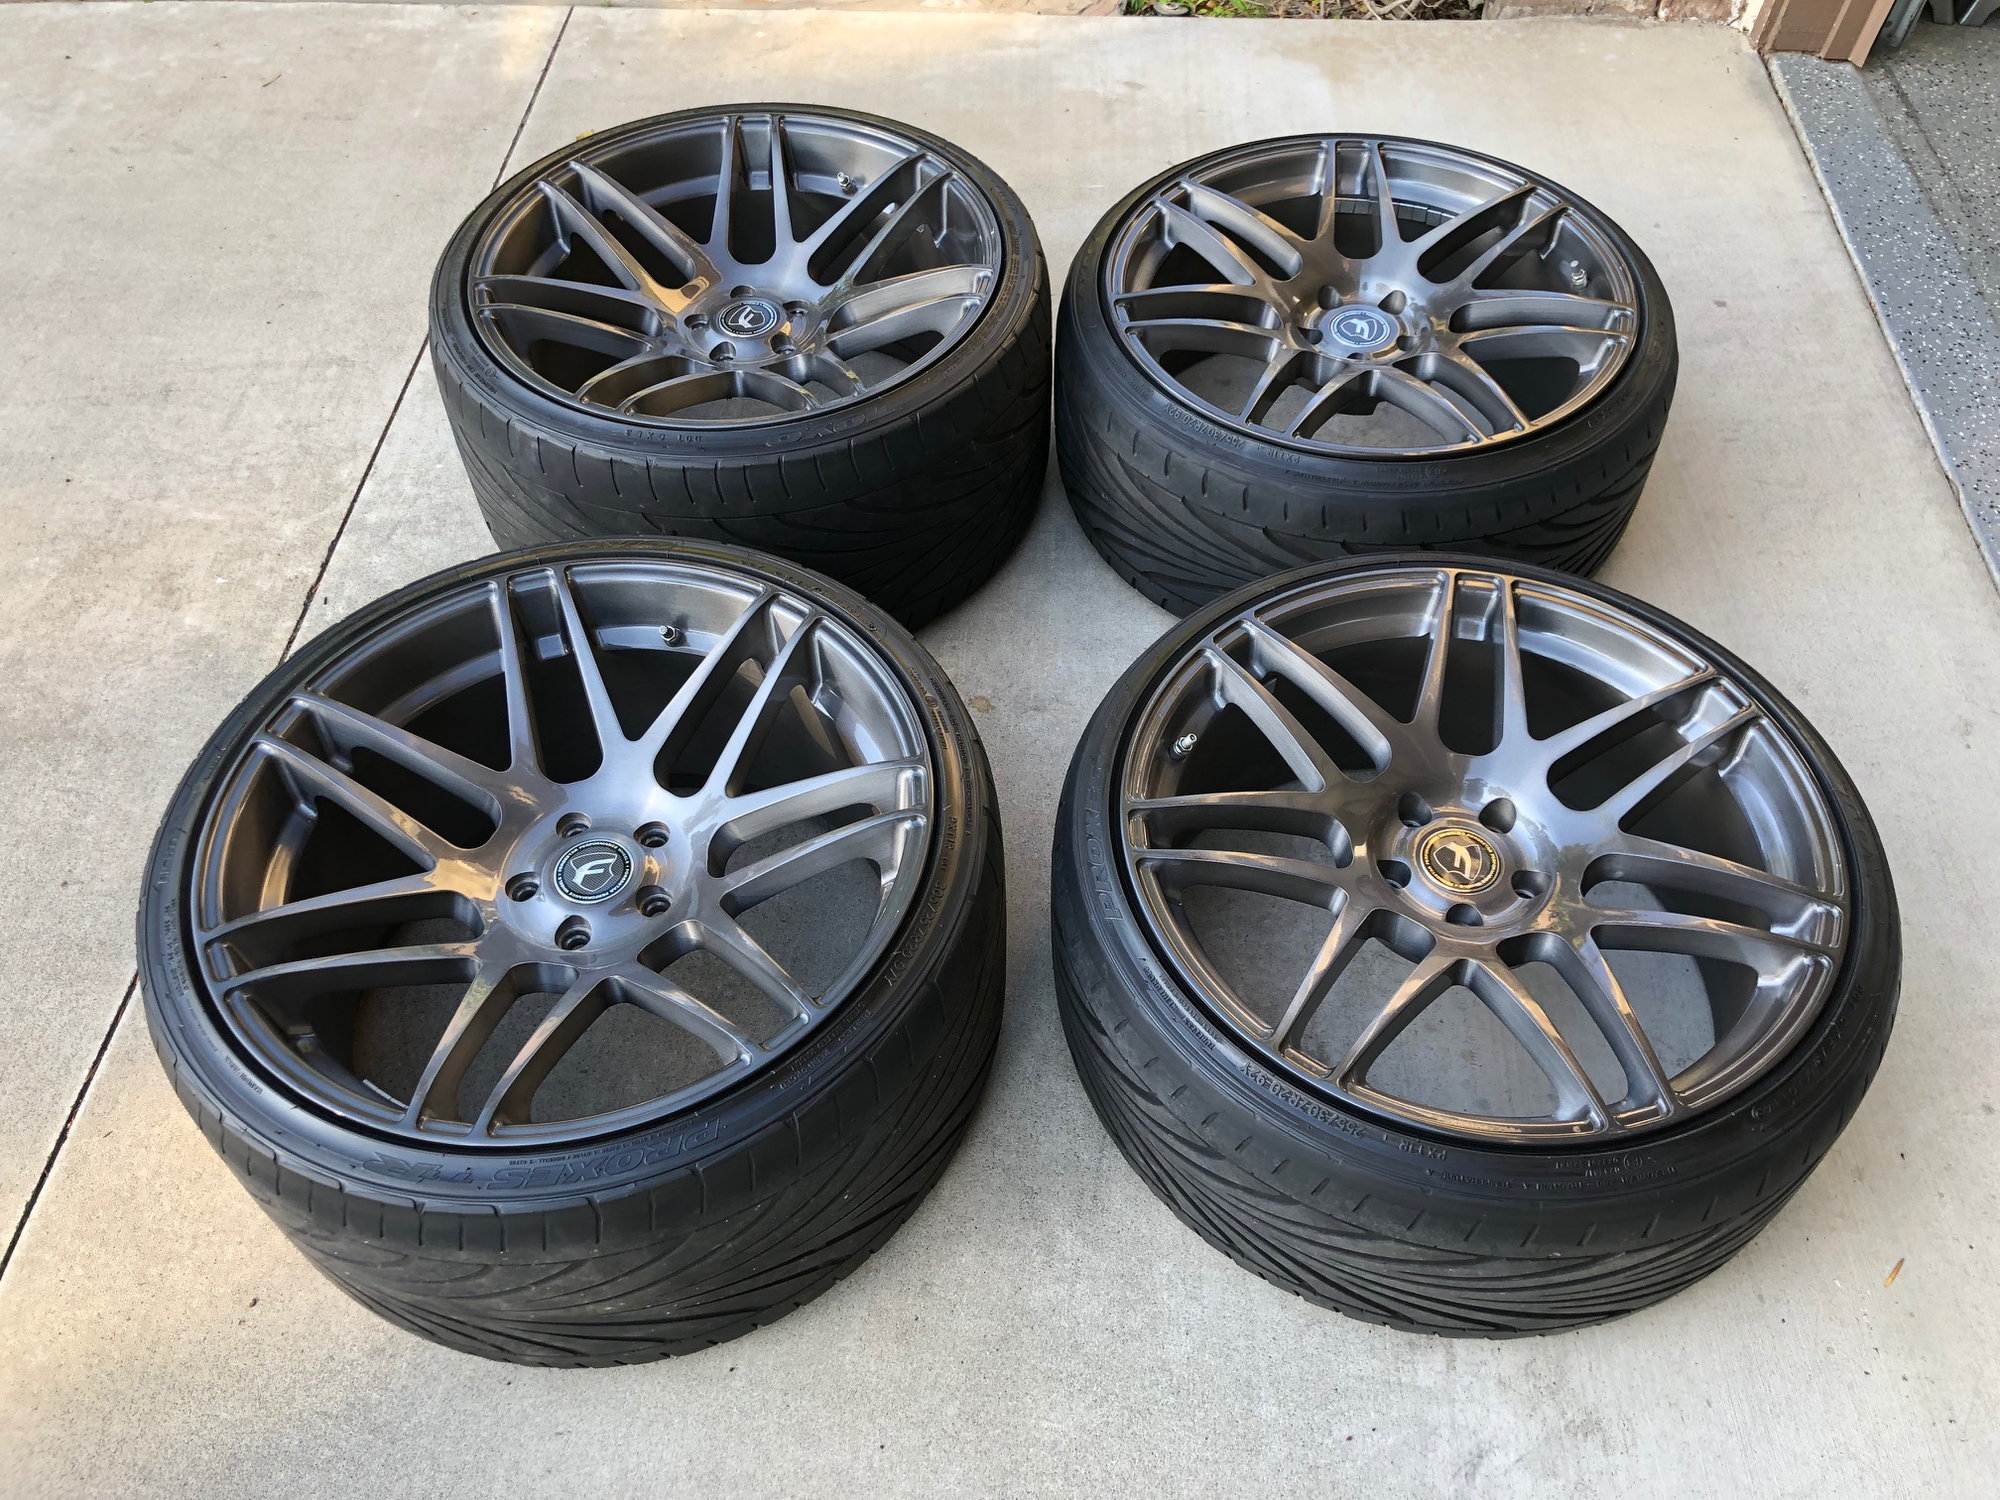 Wheels and Tires/Axles - Forgestar F14 20 inch F14 Deep Super Deep Concave CLS W218 - Used - Irvine, CA 92602, United States